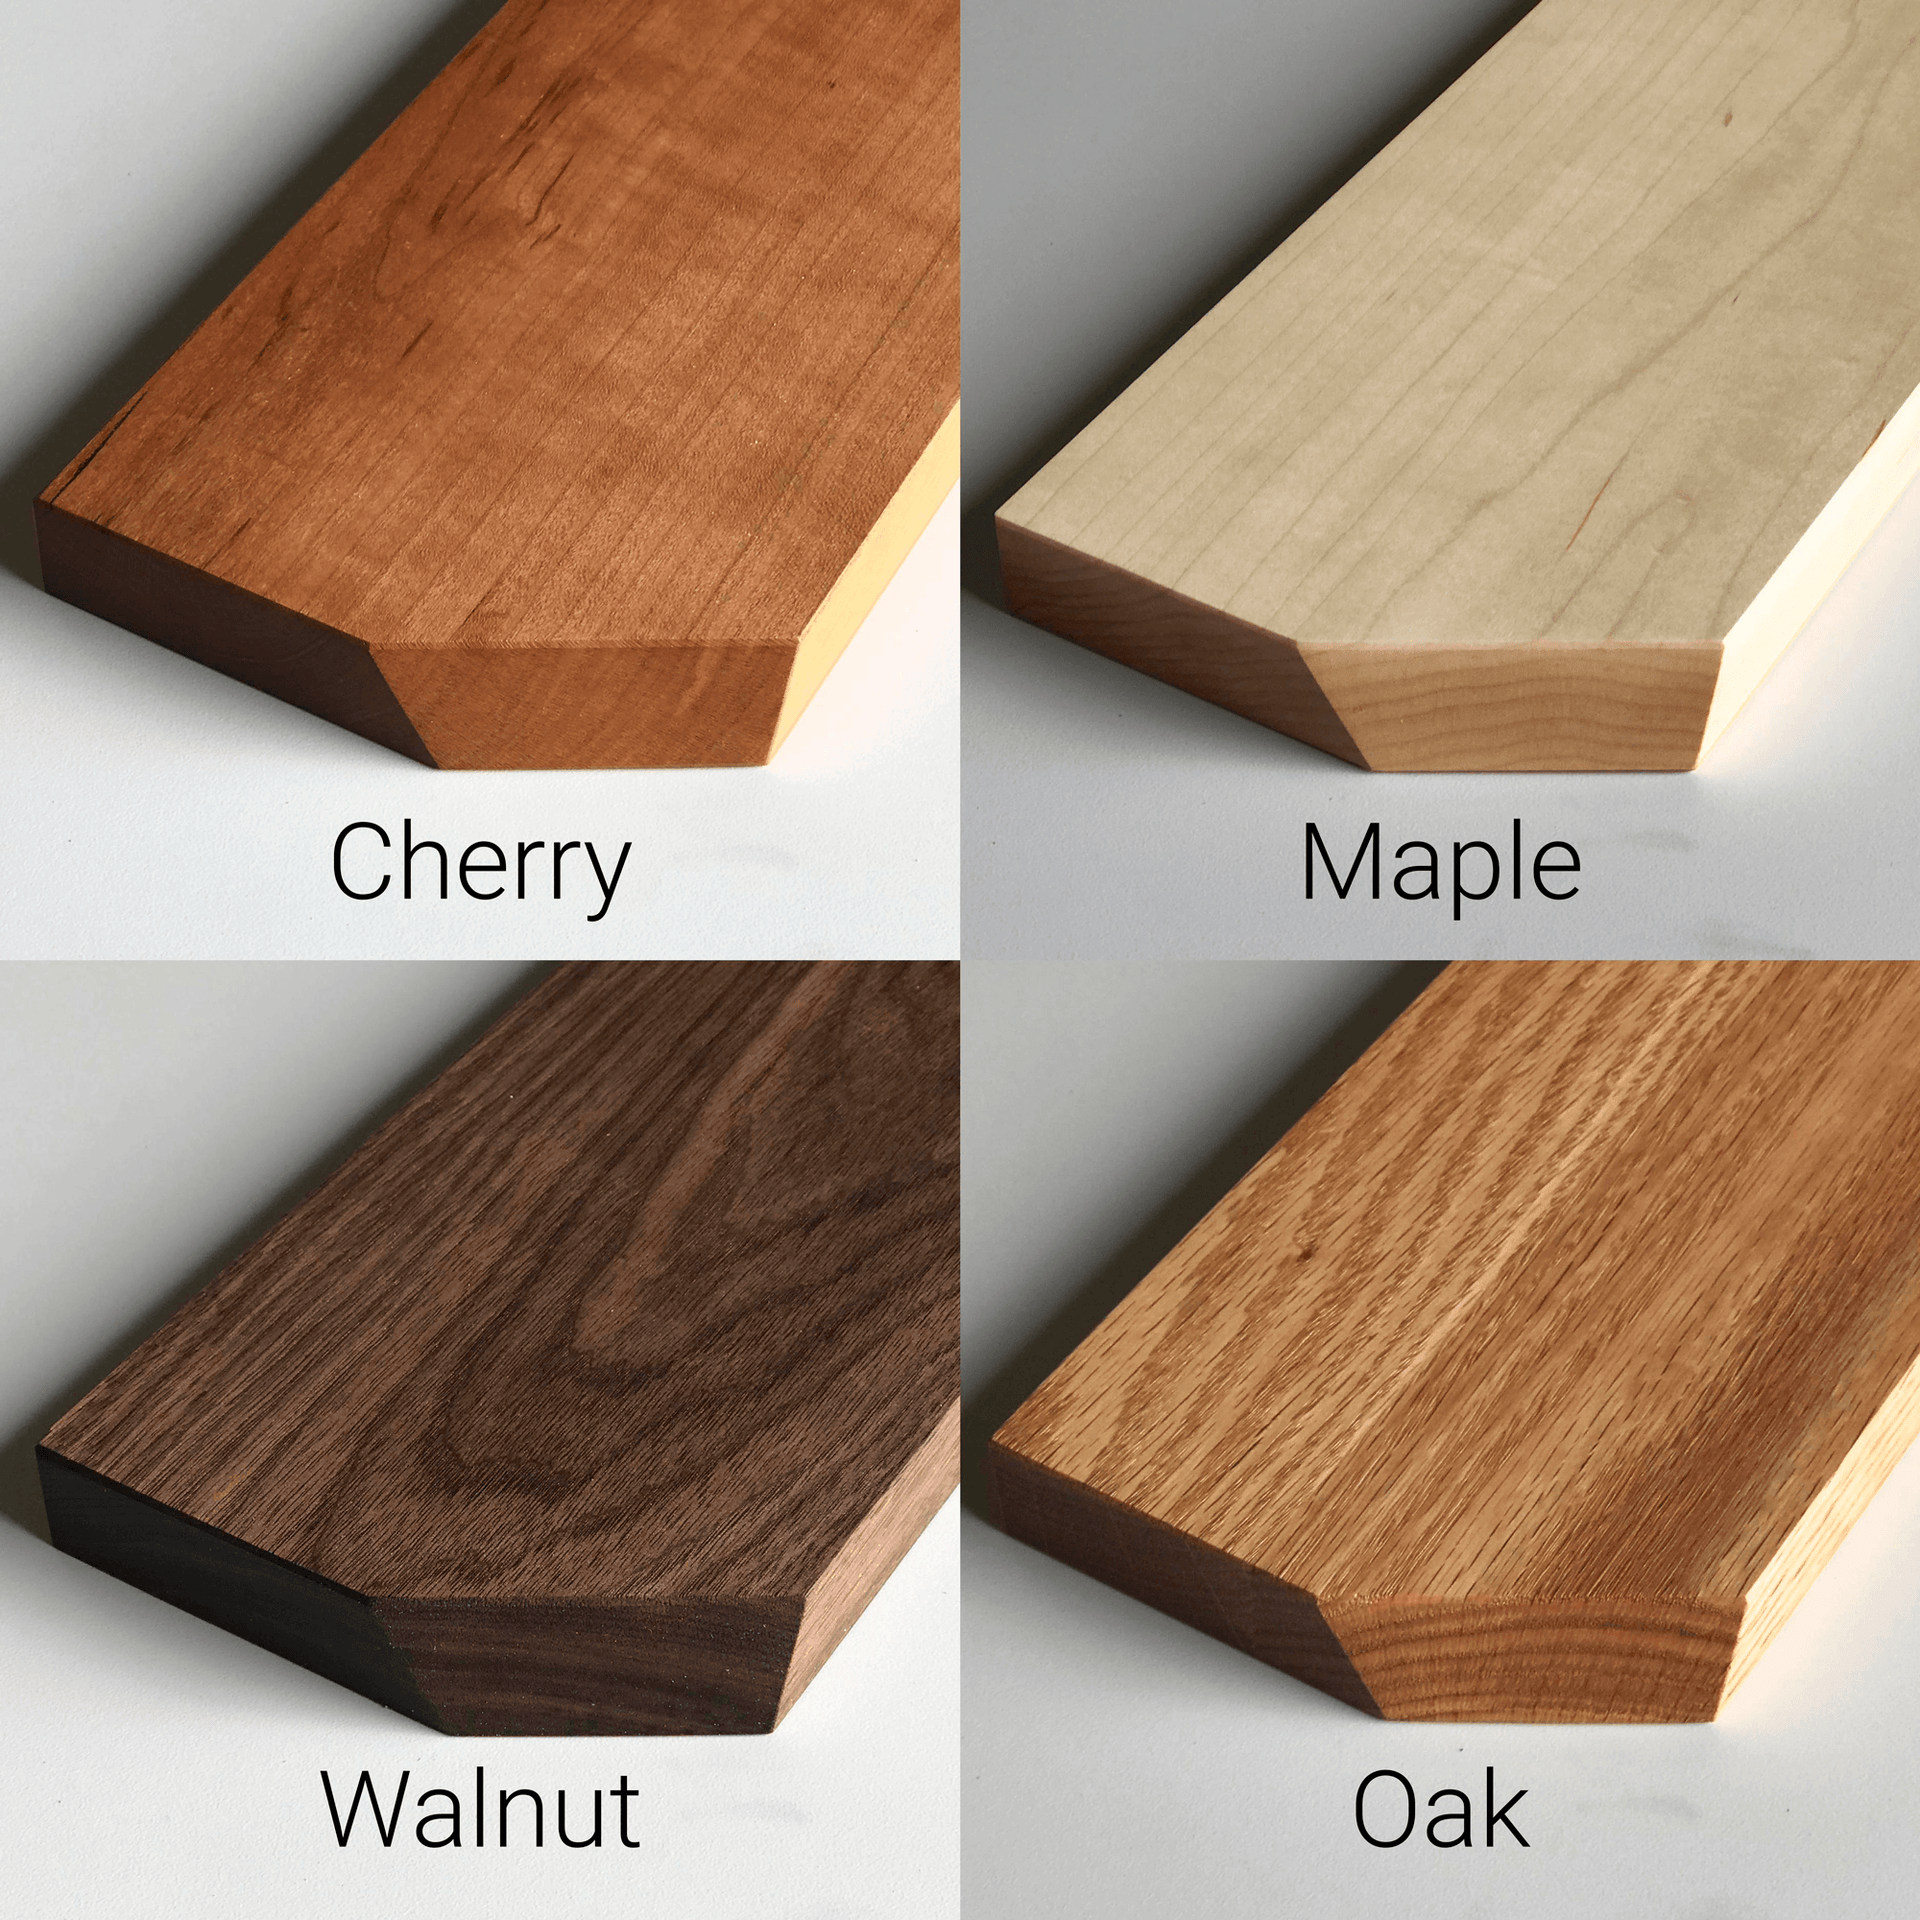 Solid wood samples of cherry, maple, walnut, and oak